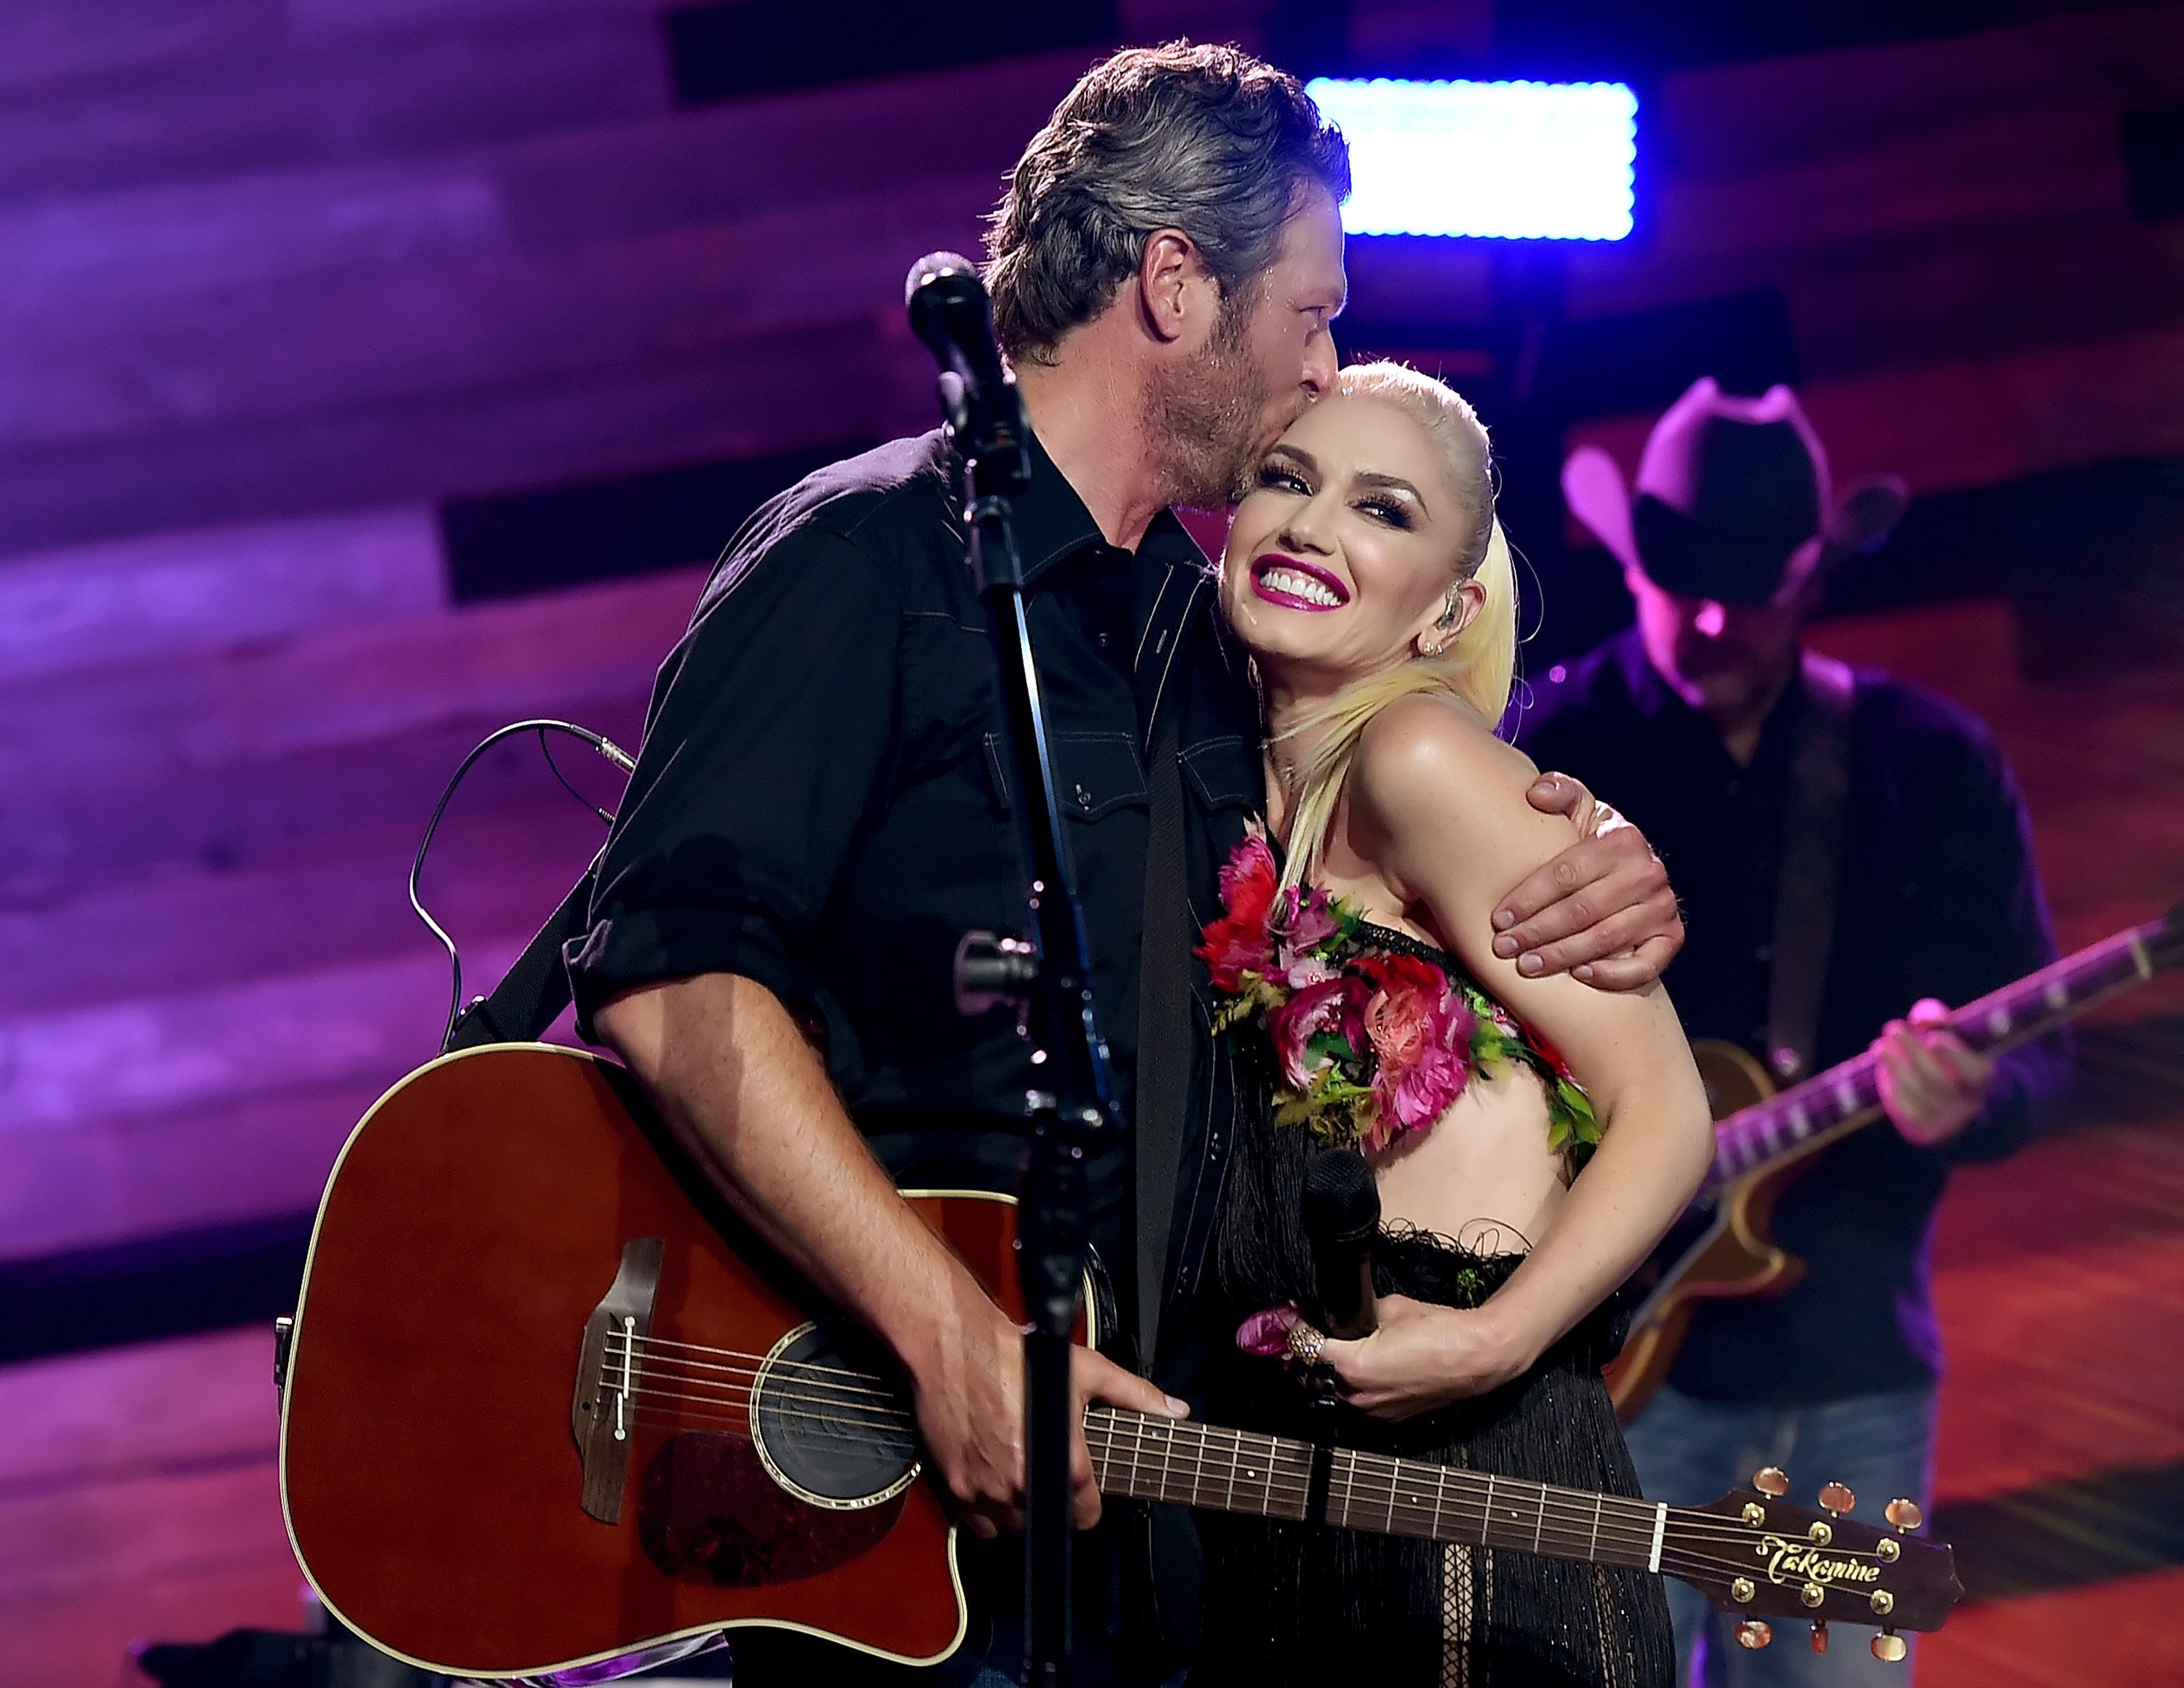 "The Voice" coaches and real-life couple Blake Shelton and Gwen Stefani during their 2016 performance at the iHeart Radio stage | Photo: Getty Images